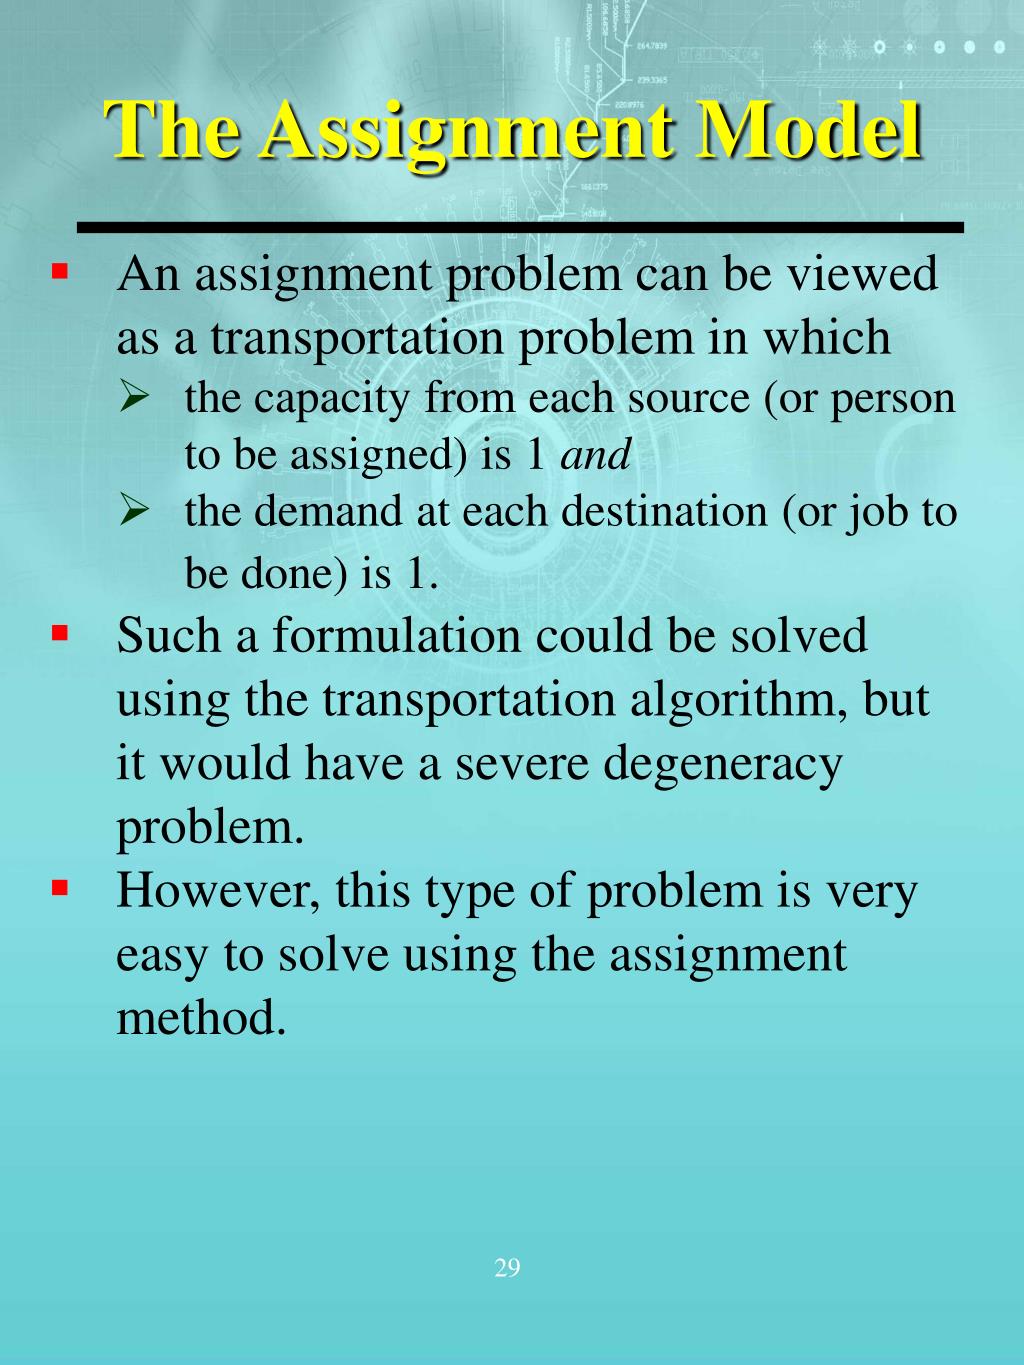 example of assignment model